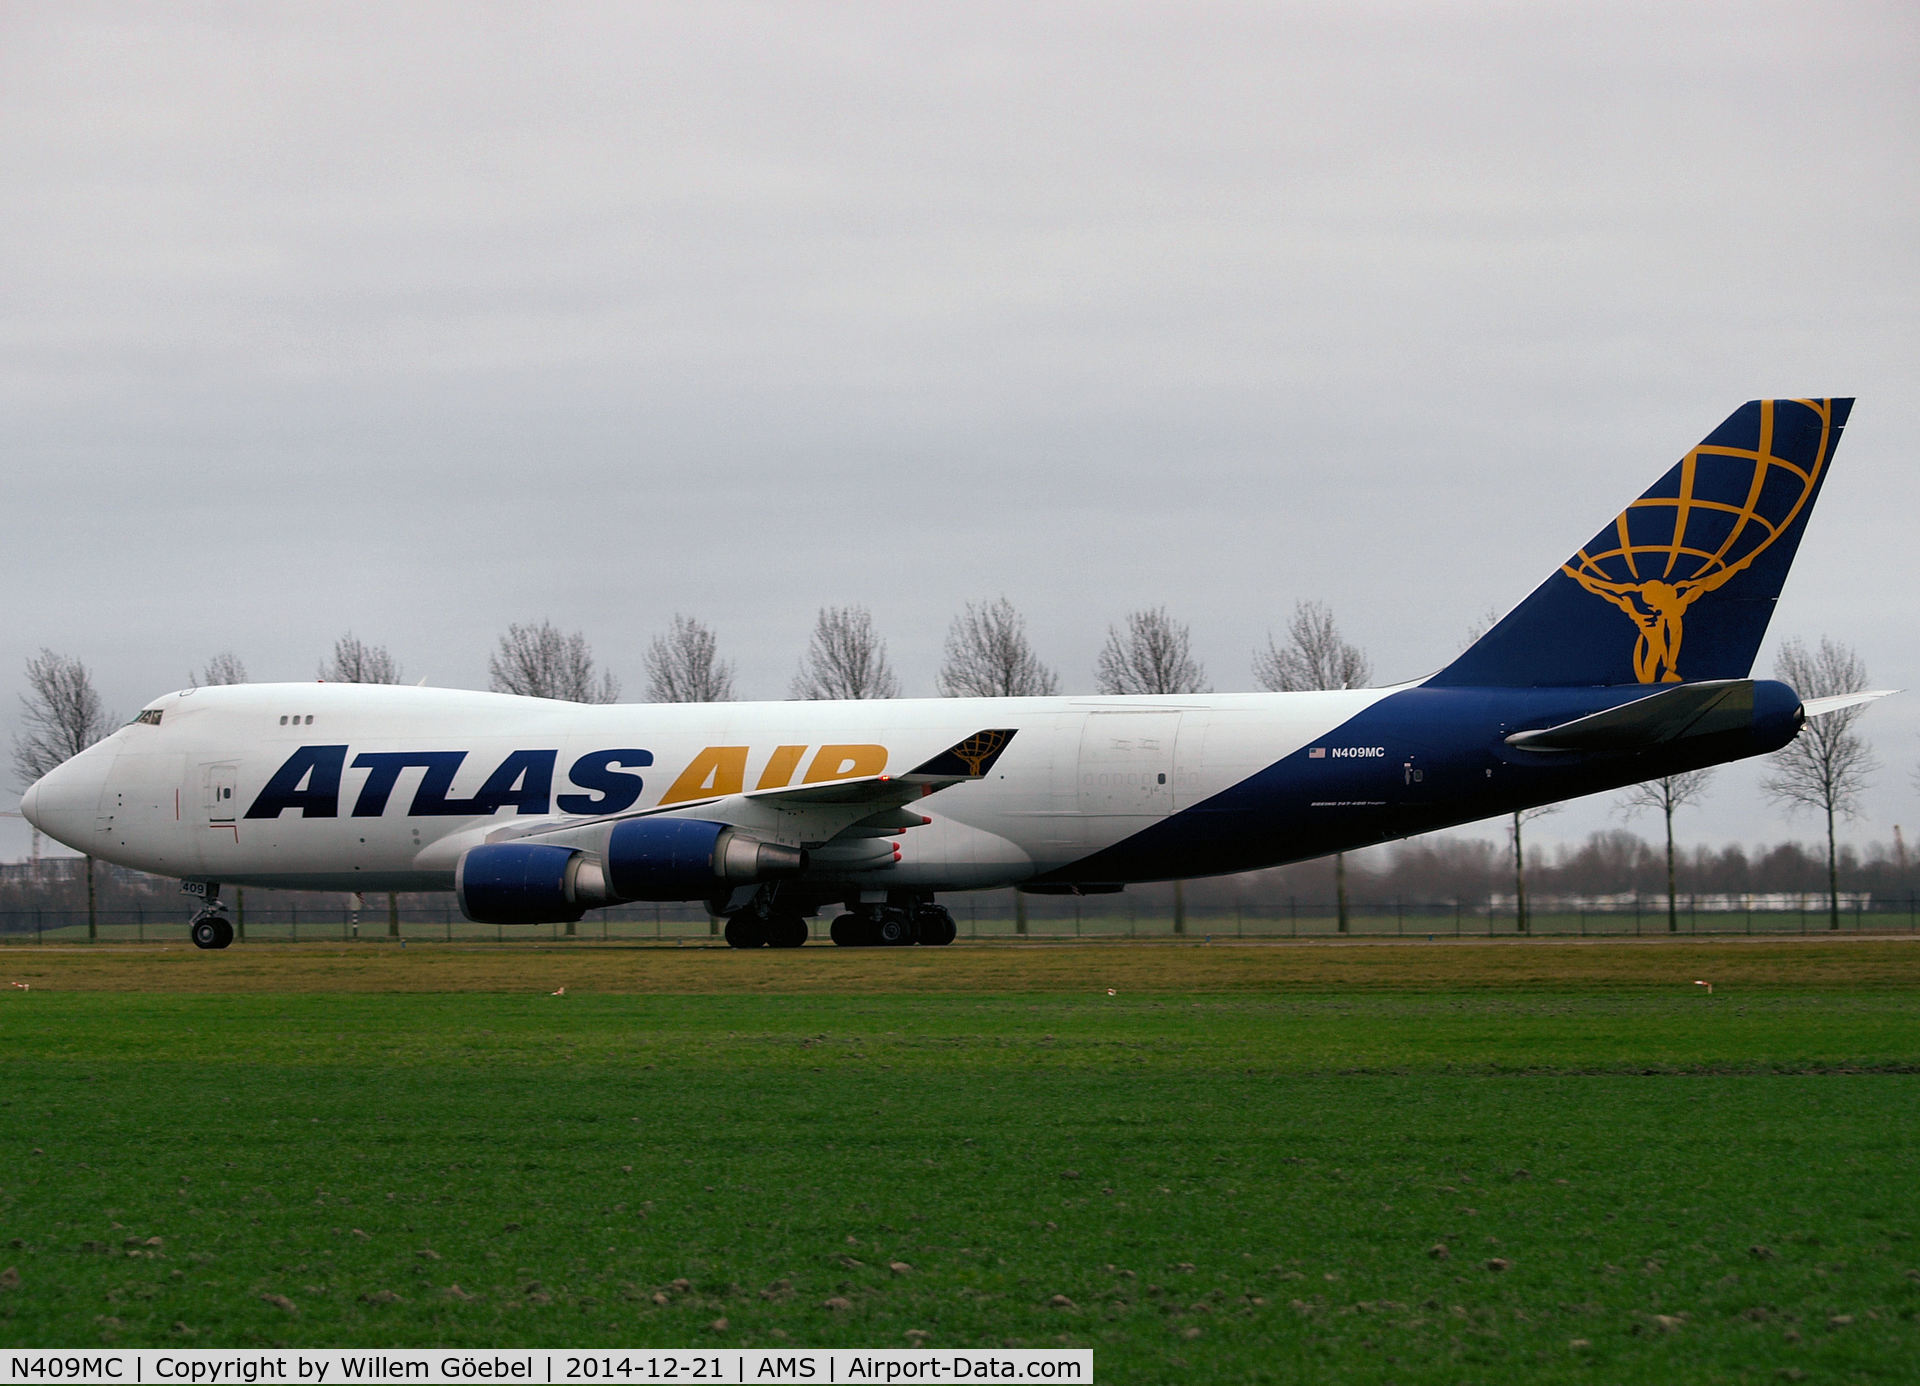 N409MC, 2000 Boeing 747-47UF C/N 30558/1242, Taxi from runway 18R to the gate of Schiphol Airport